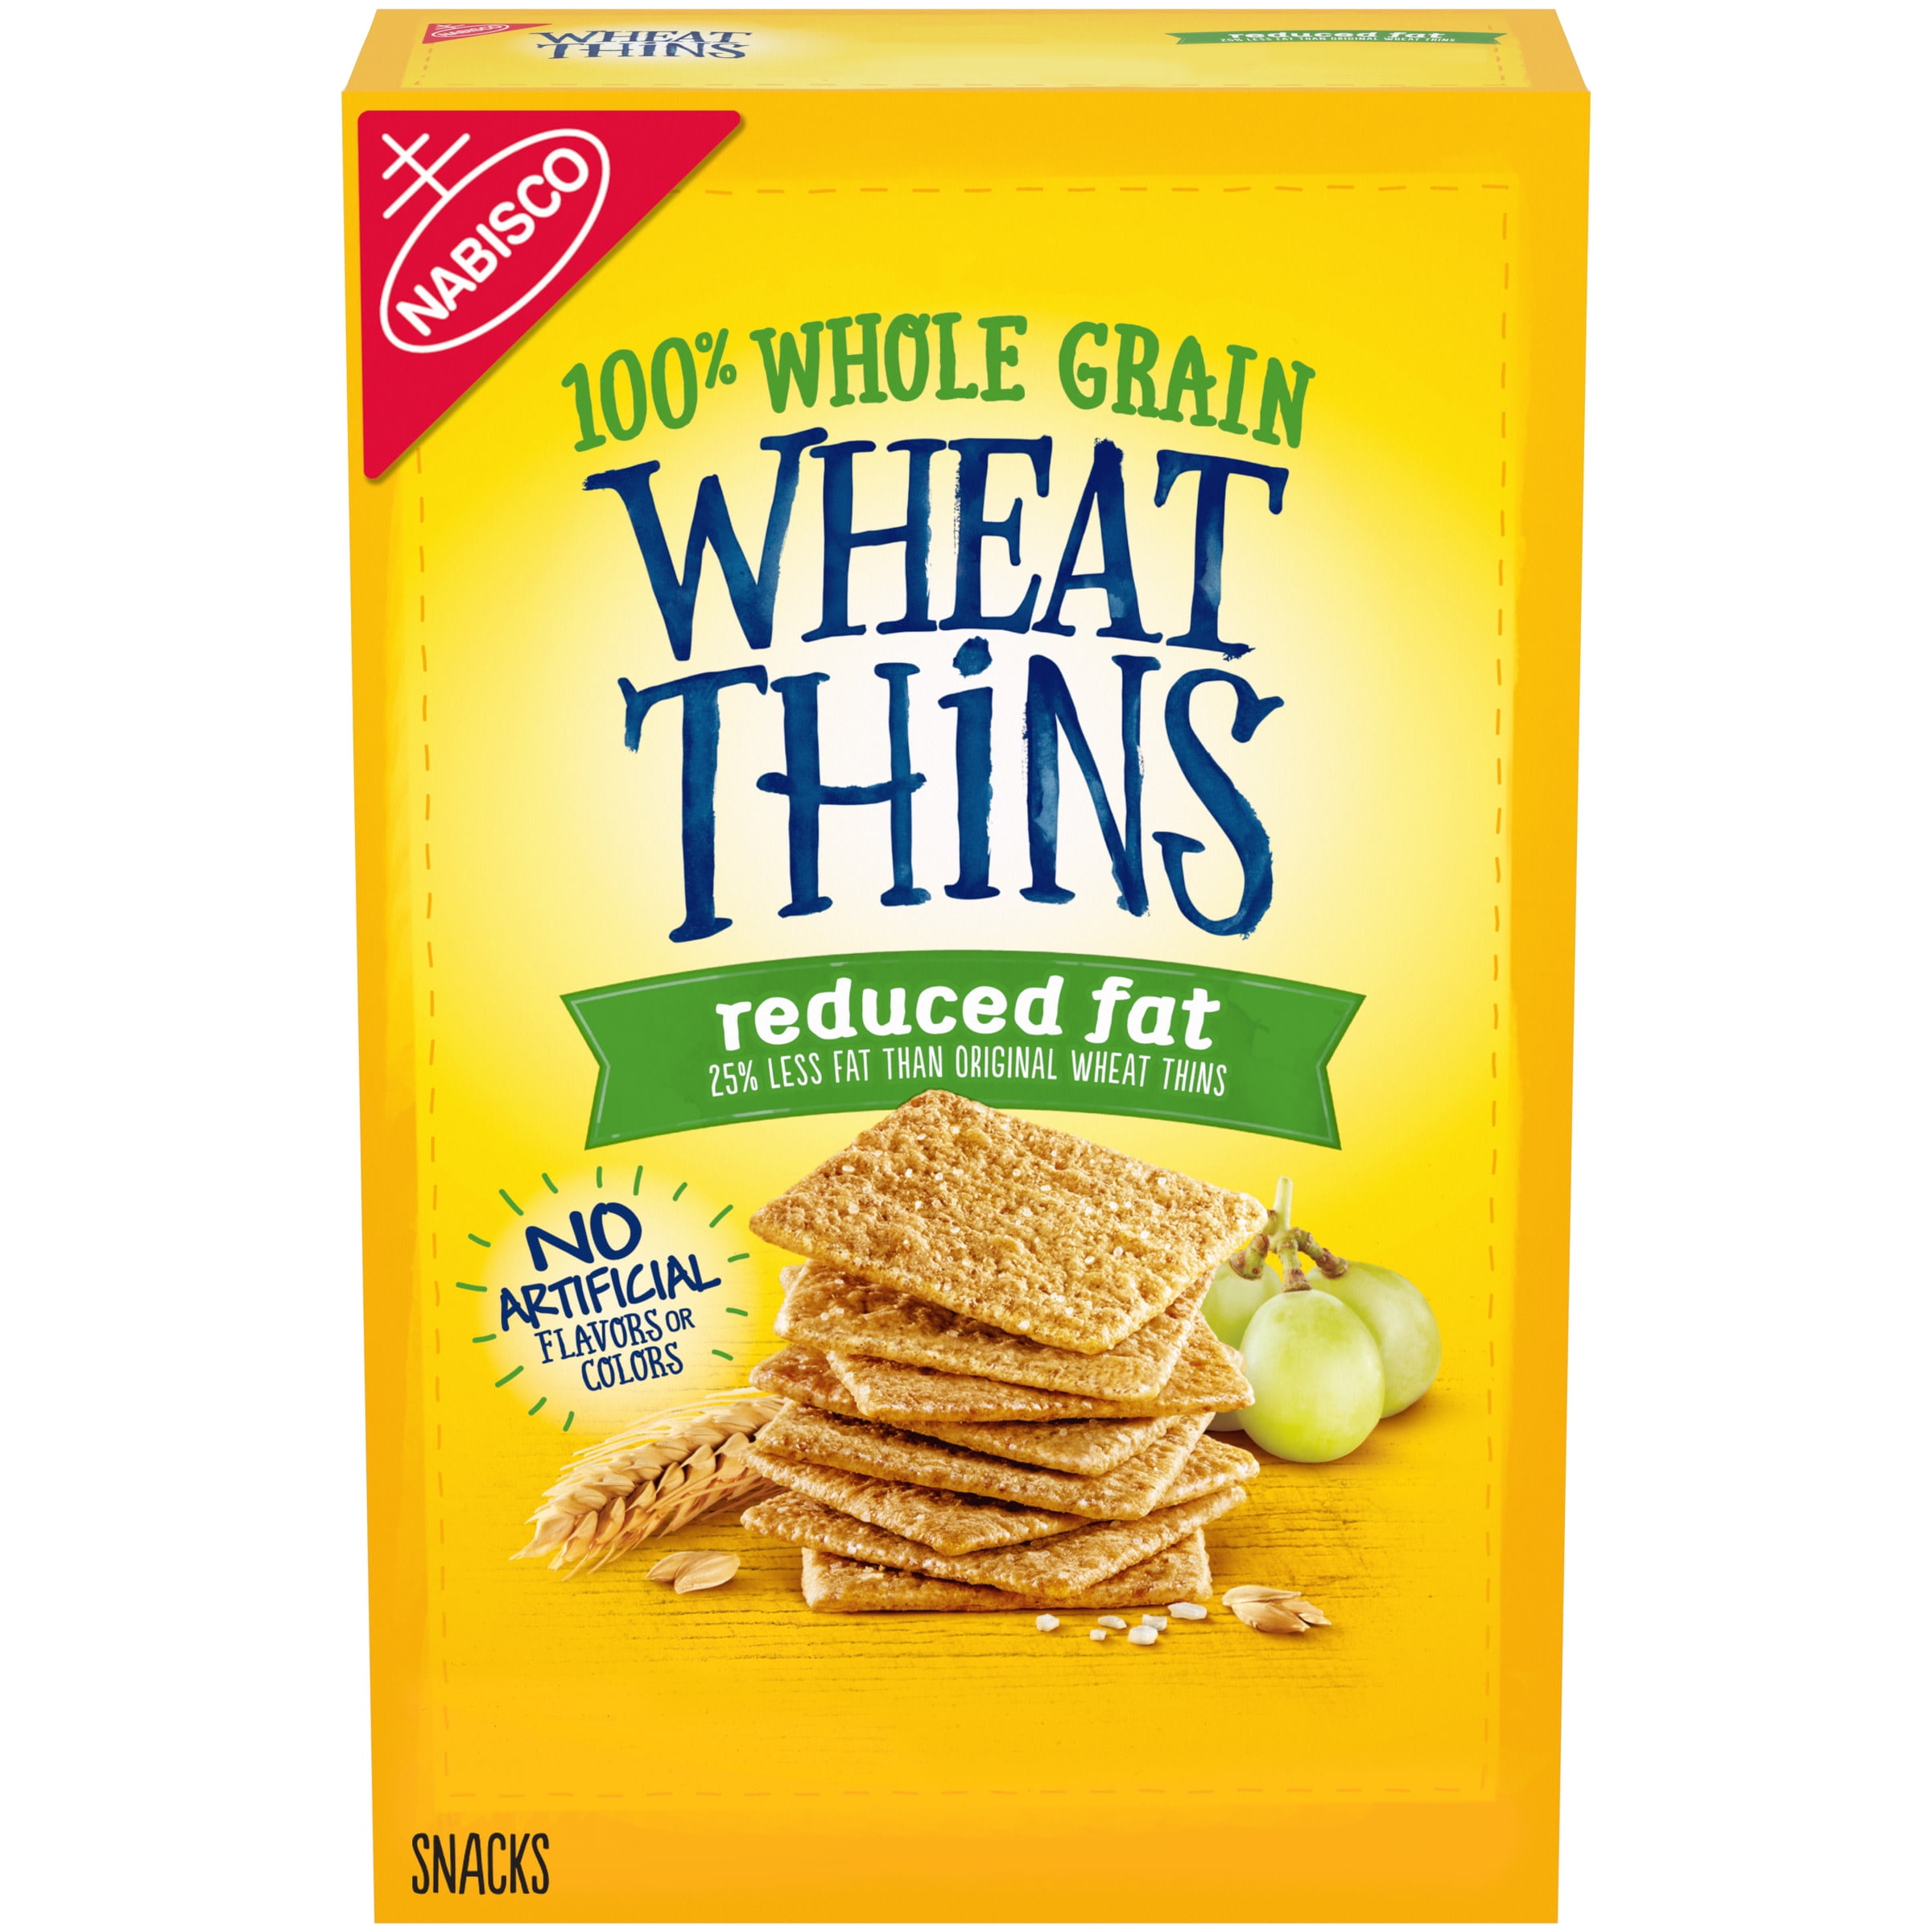 Wheat Thins Reduced Fat Whole Grain Wheat Crackers, 8 oz